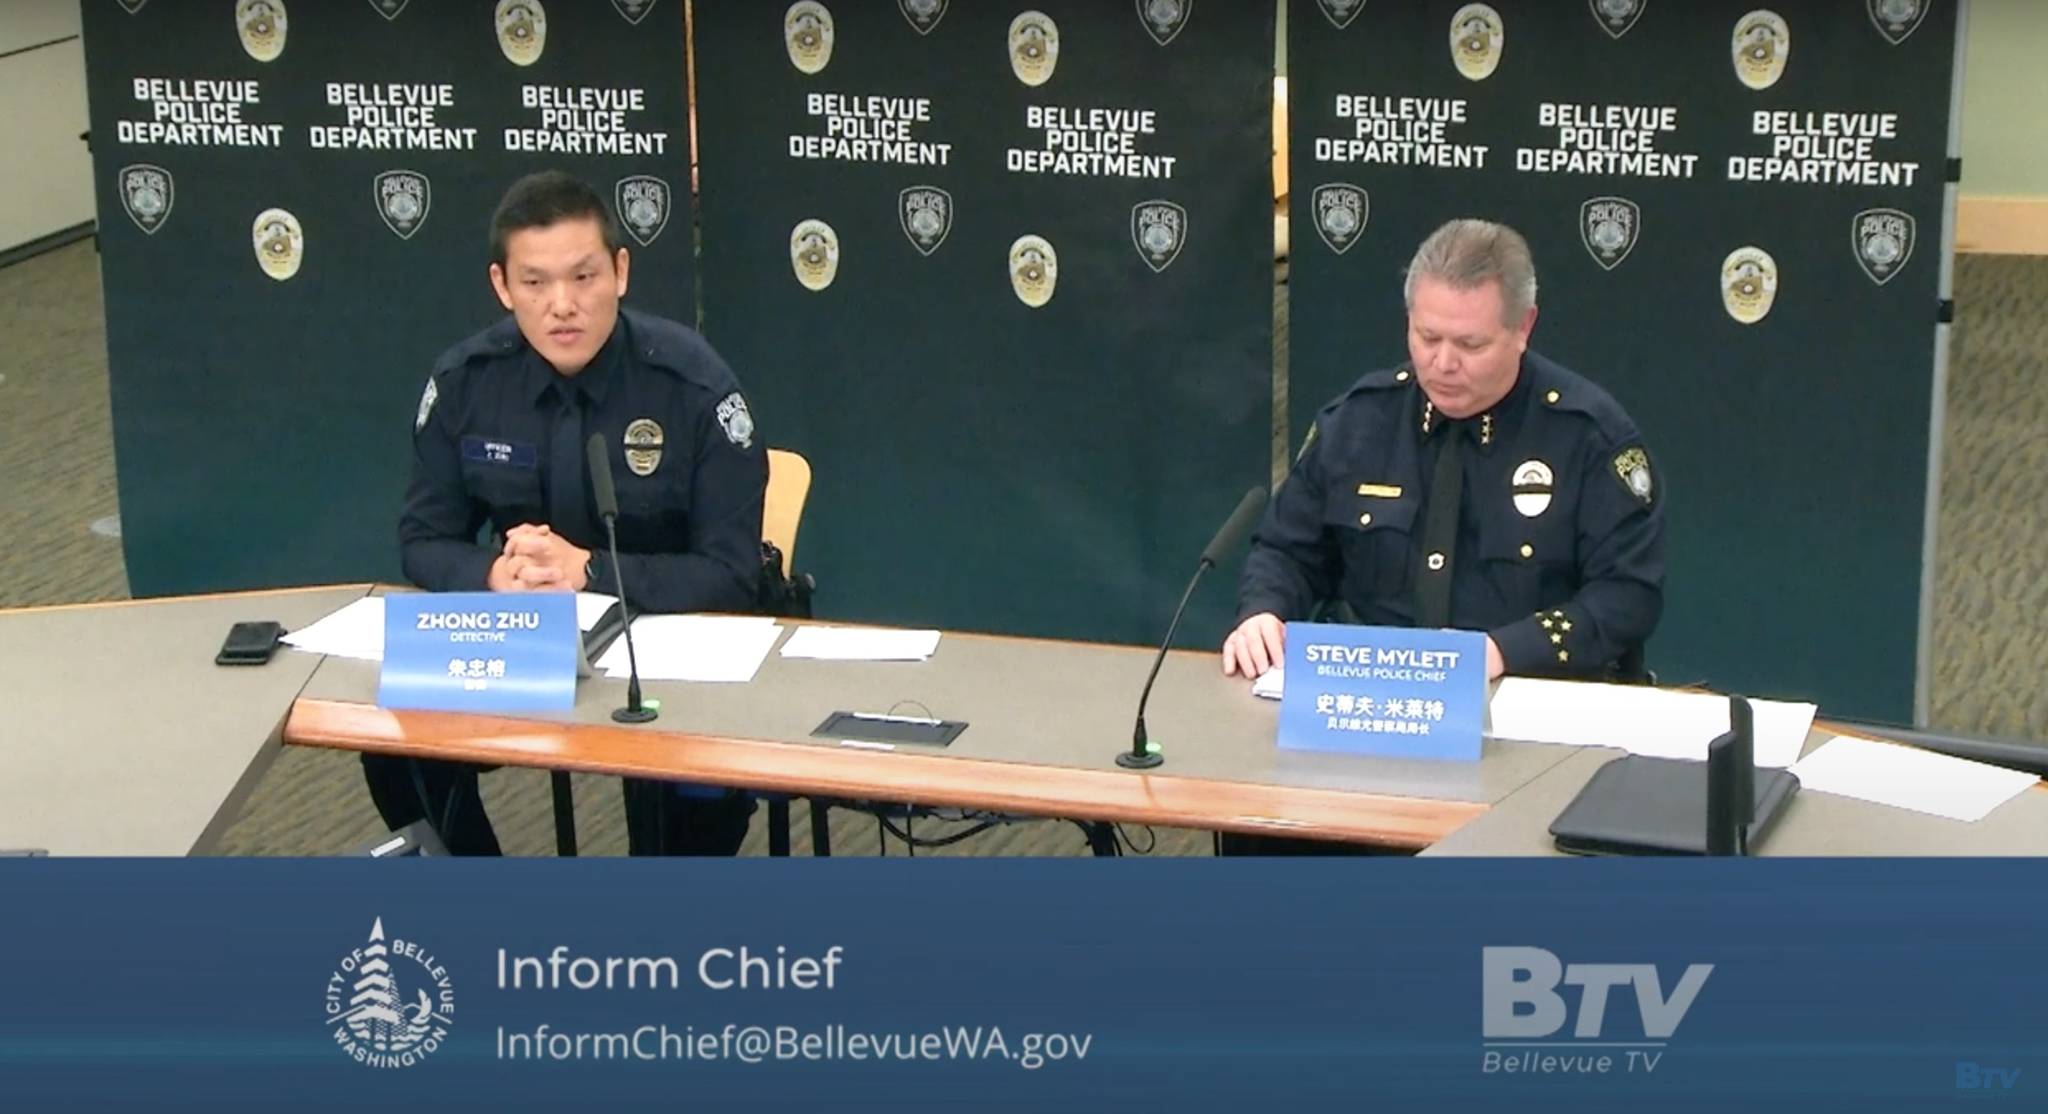 From left, Det. Zhong Zhu and Police Chief Steve Mylett with the Bellevue Police Department answered community questions during a virtual town hall that addressed the racism against Asians and Asian Americans that has occurred since the outbreak of COVID-19 began. Screenshot of live stream